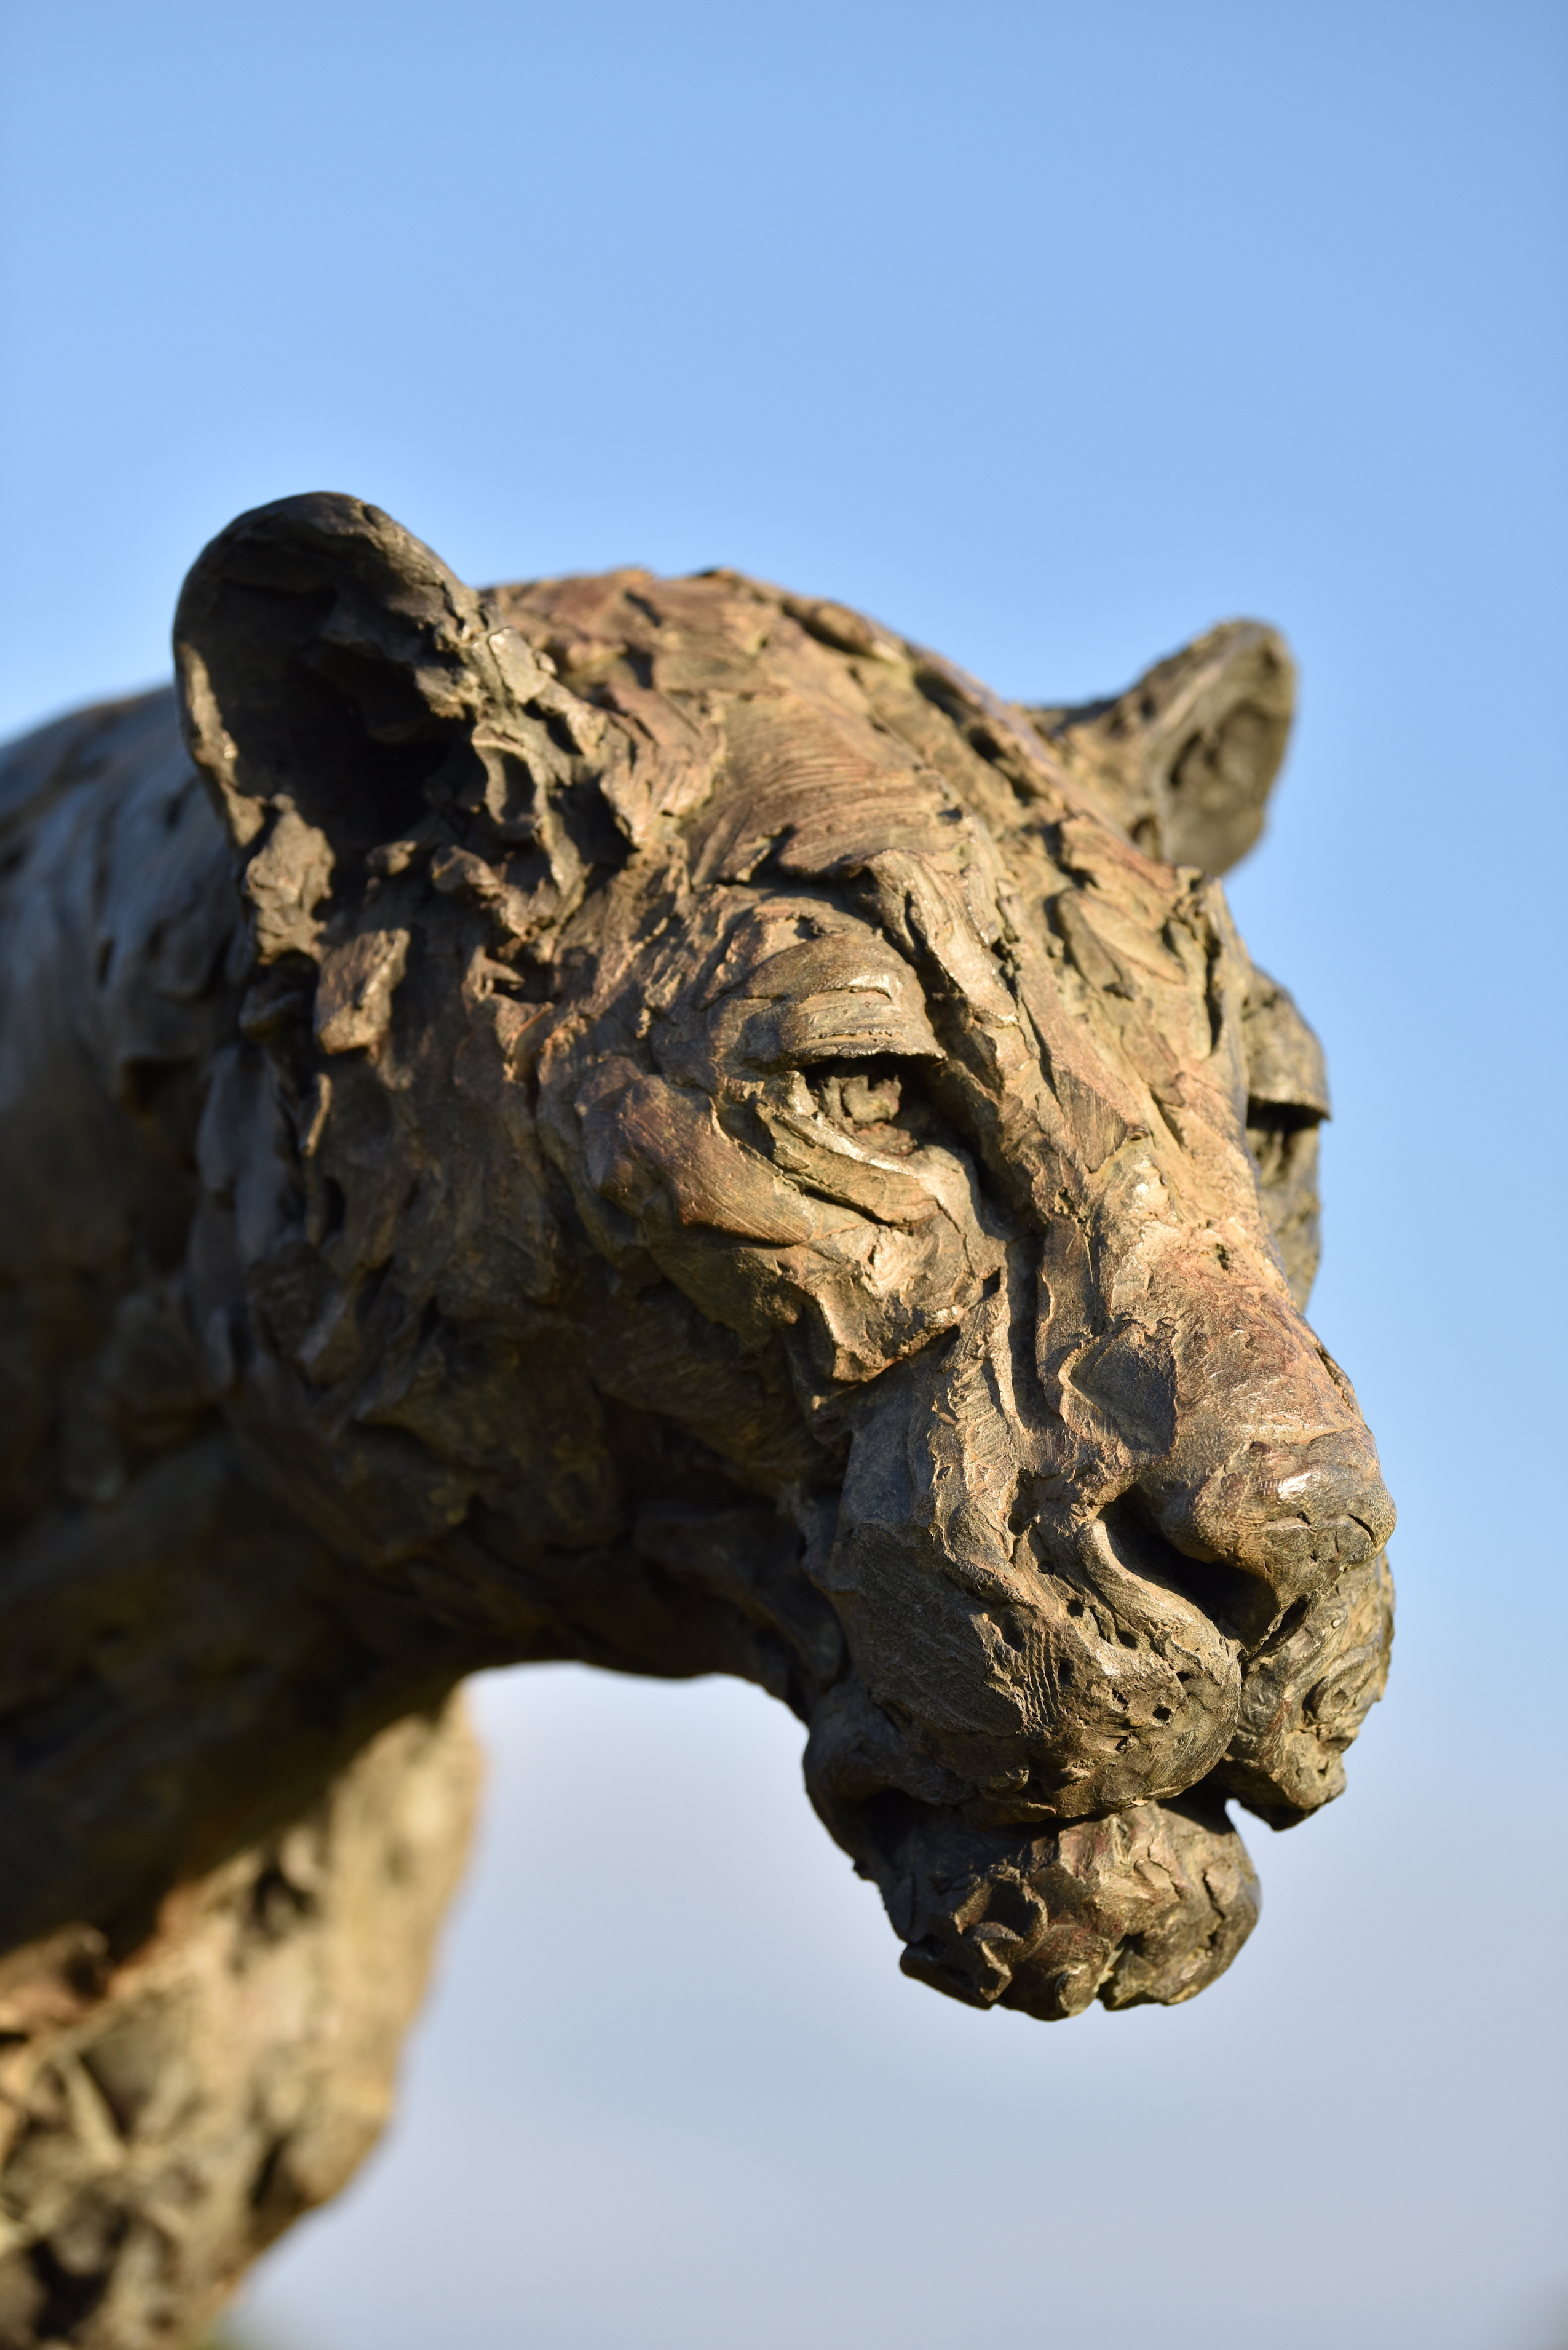 Lioness Life size sculpture by Hamish Mackie